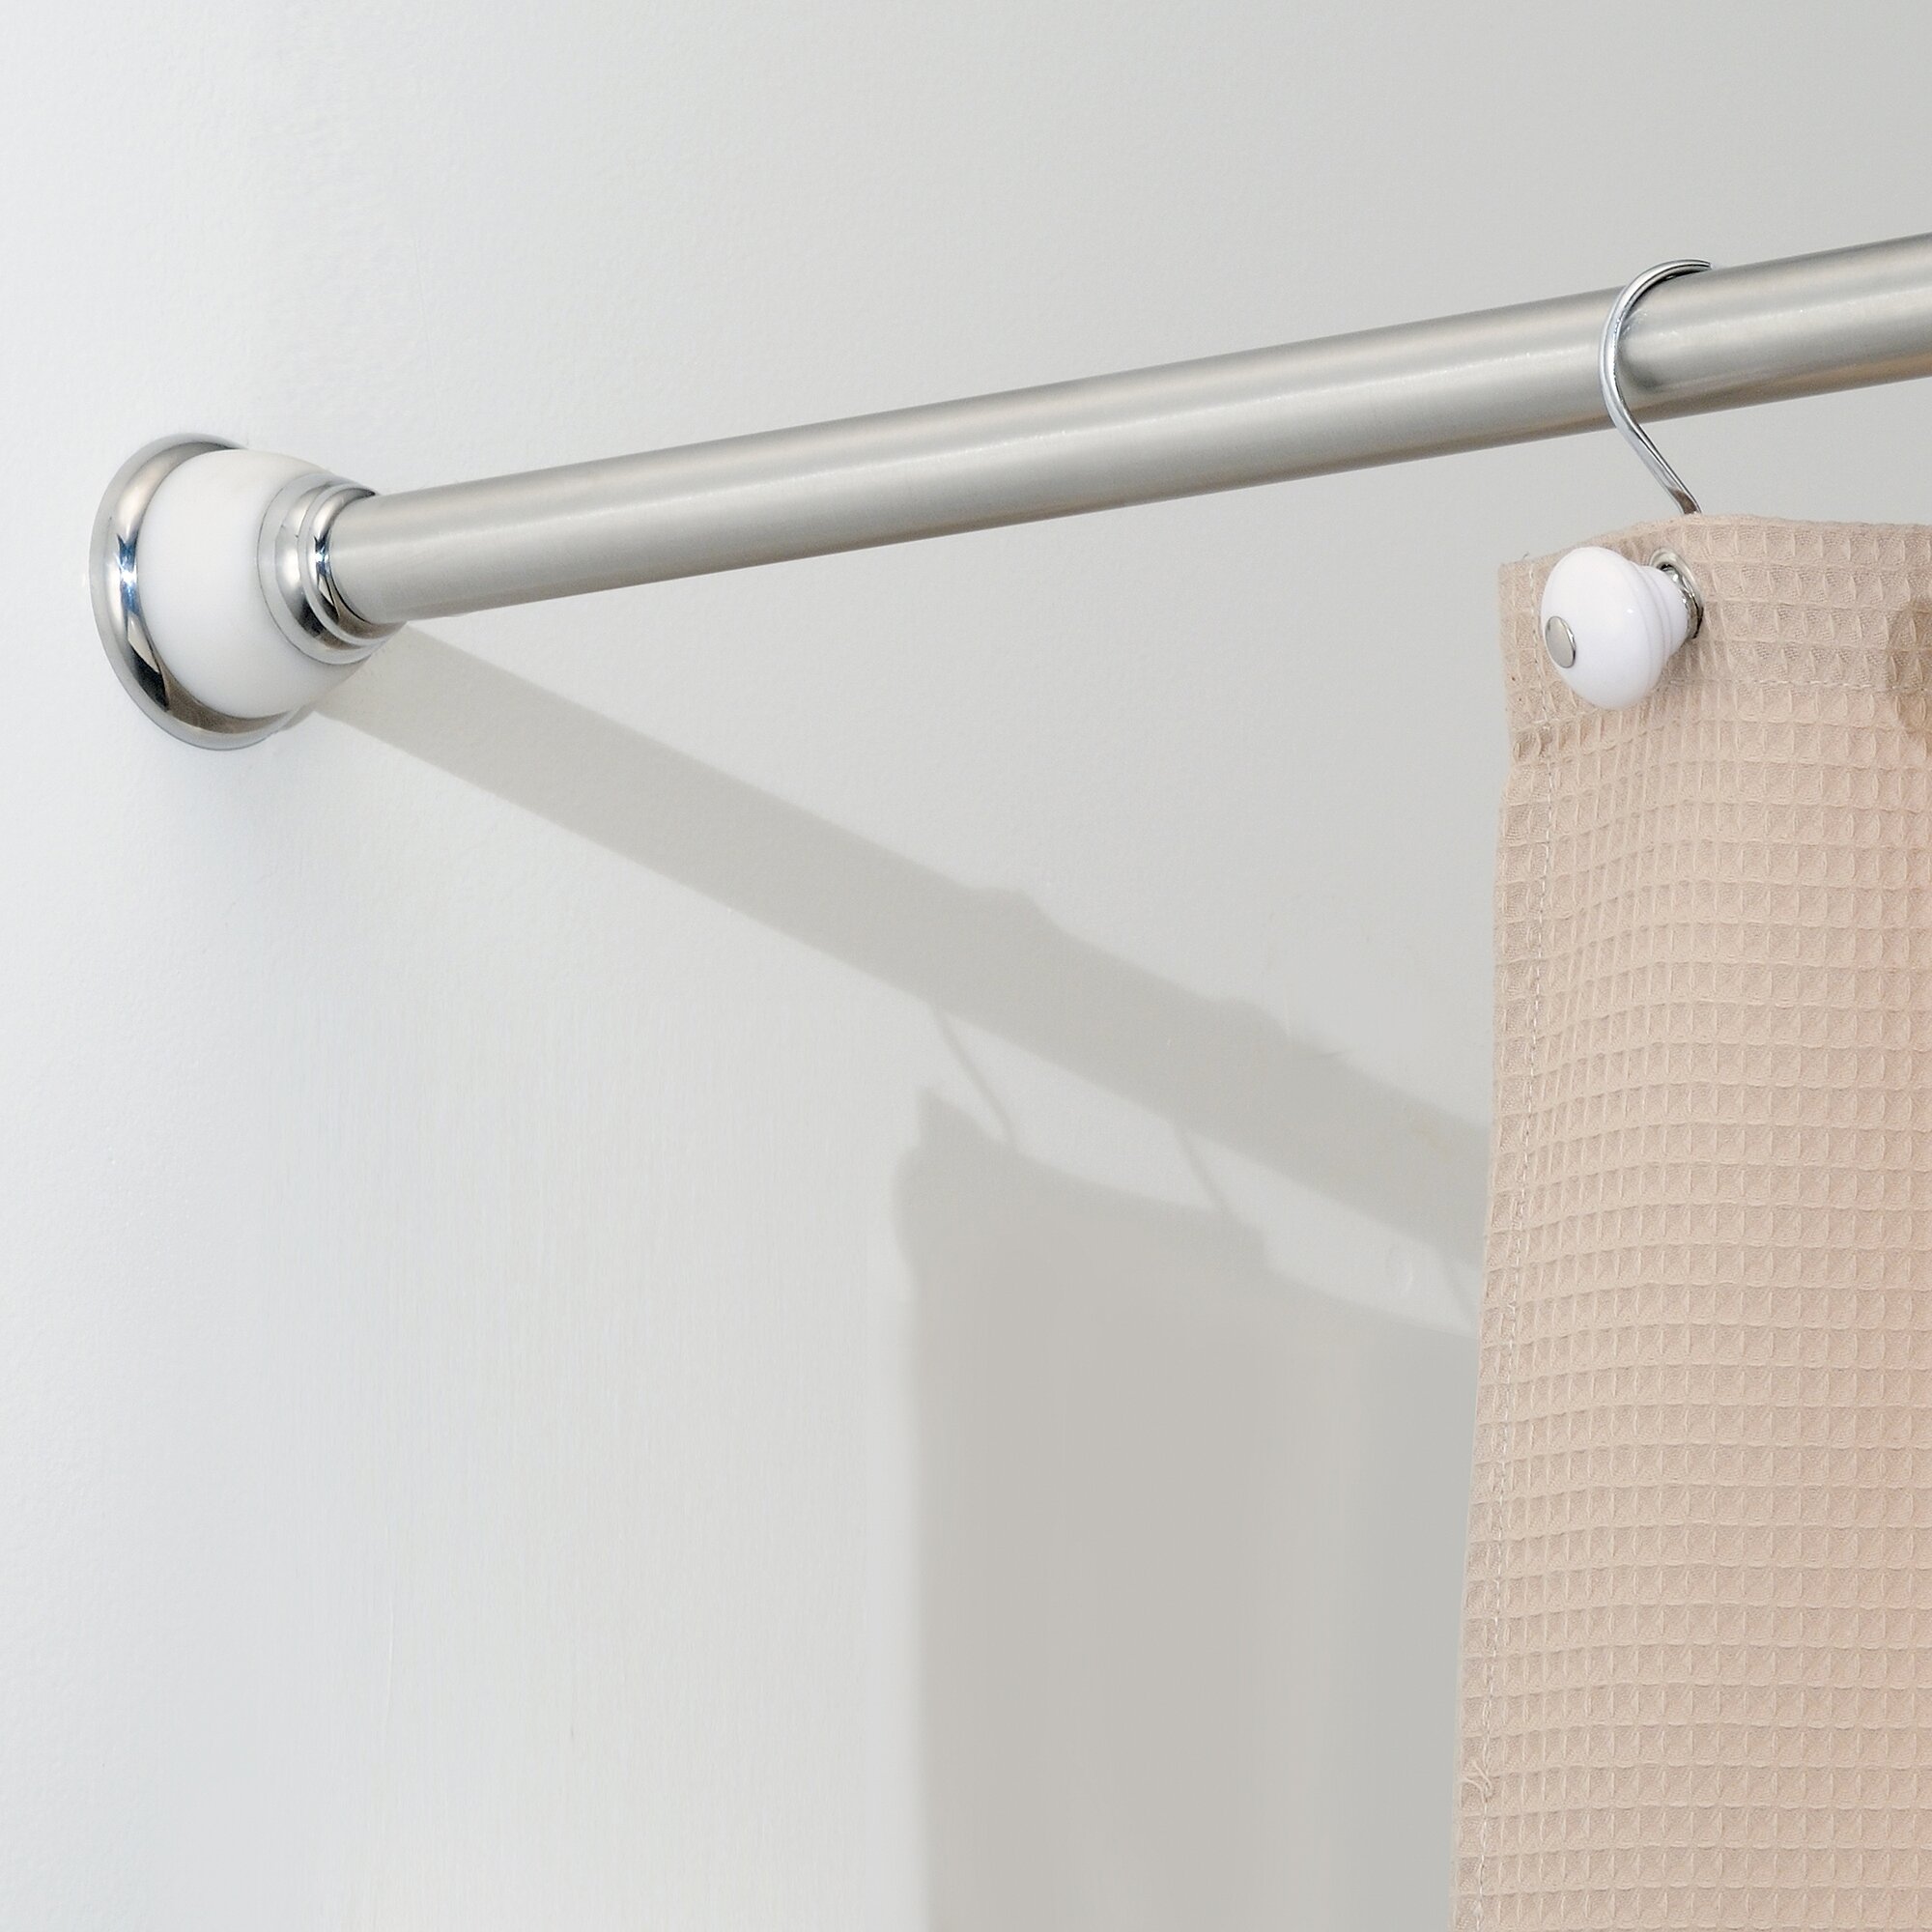 Shower Curtain Tension Rod | Tension Shower Curtain Rod | Curved Tension Shower Curtain Rod